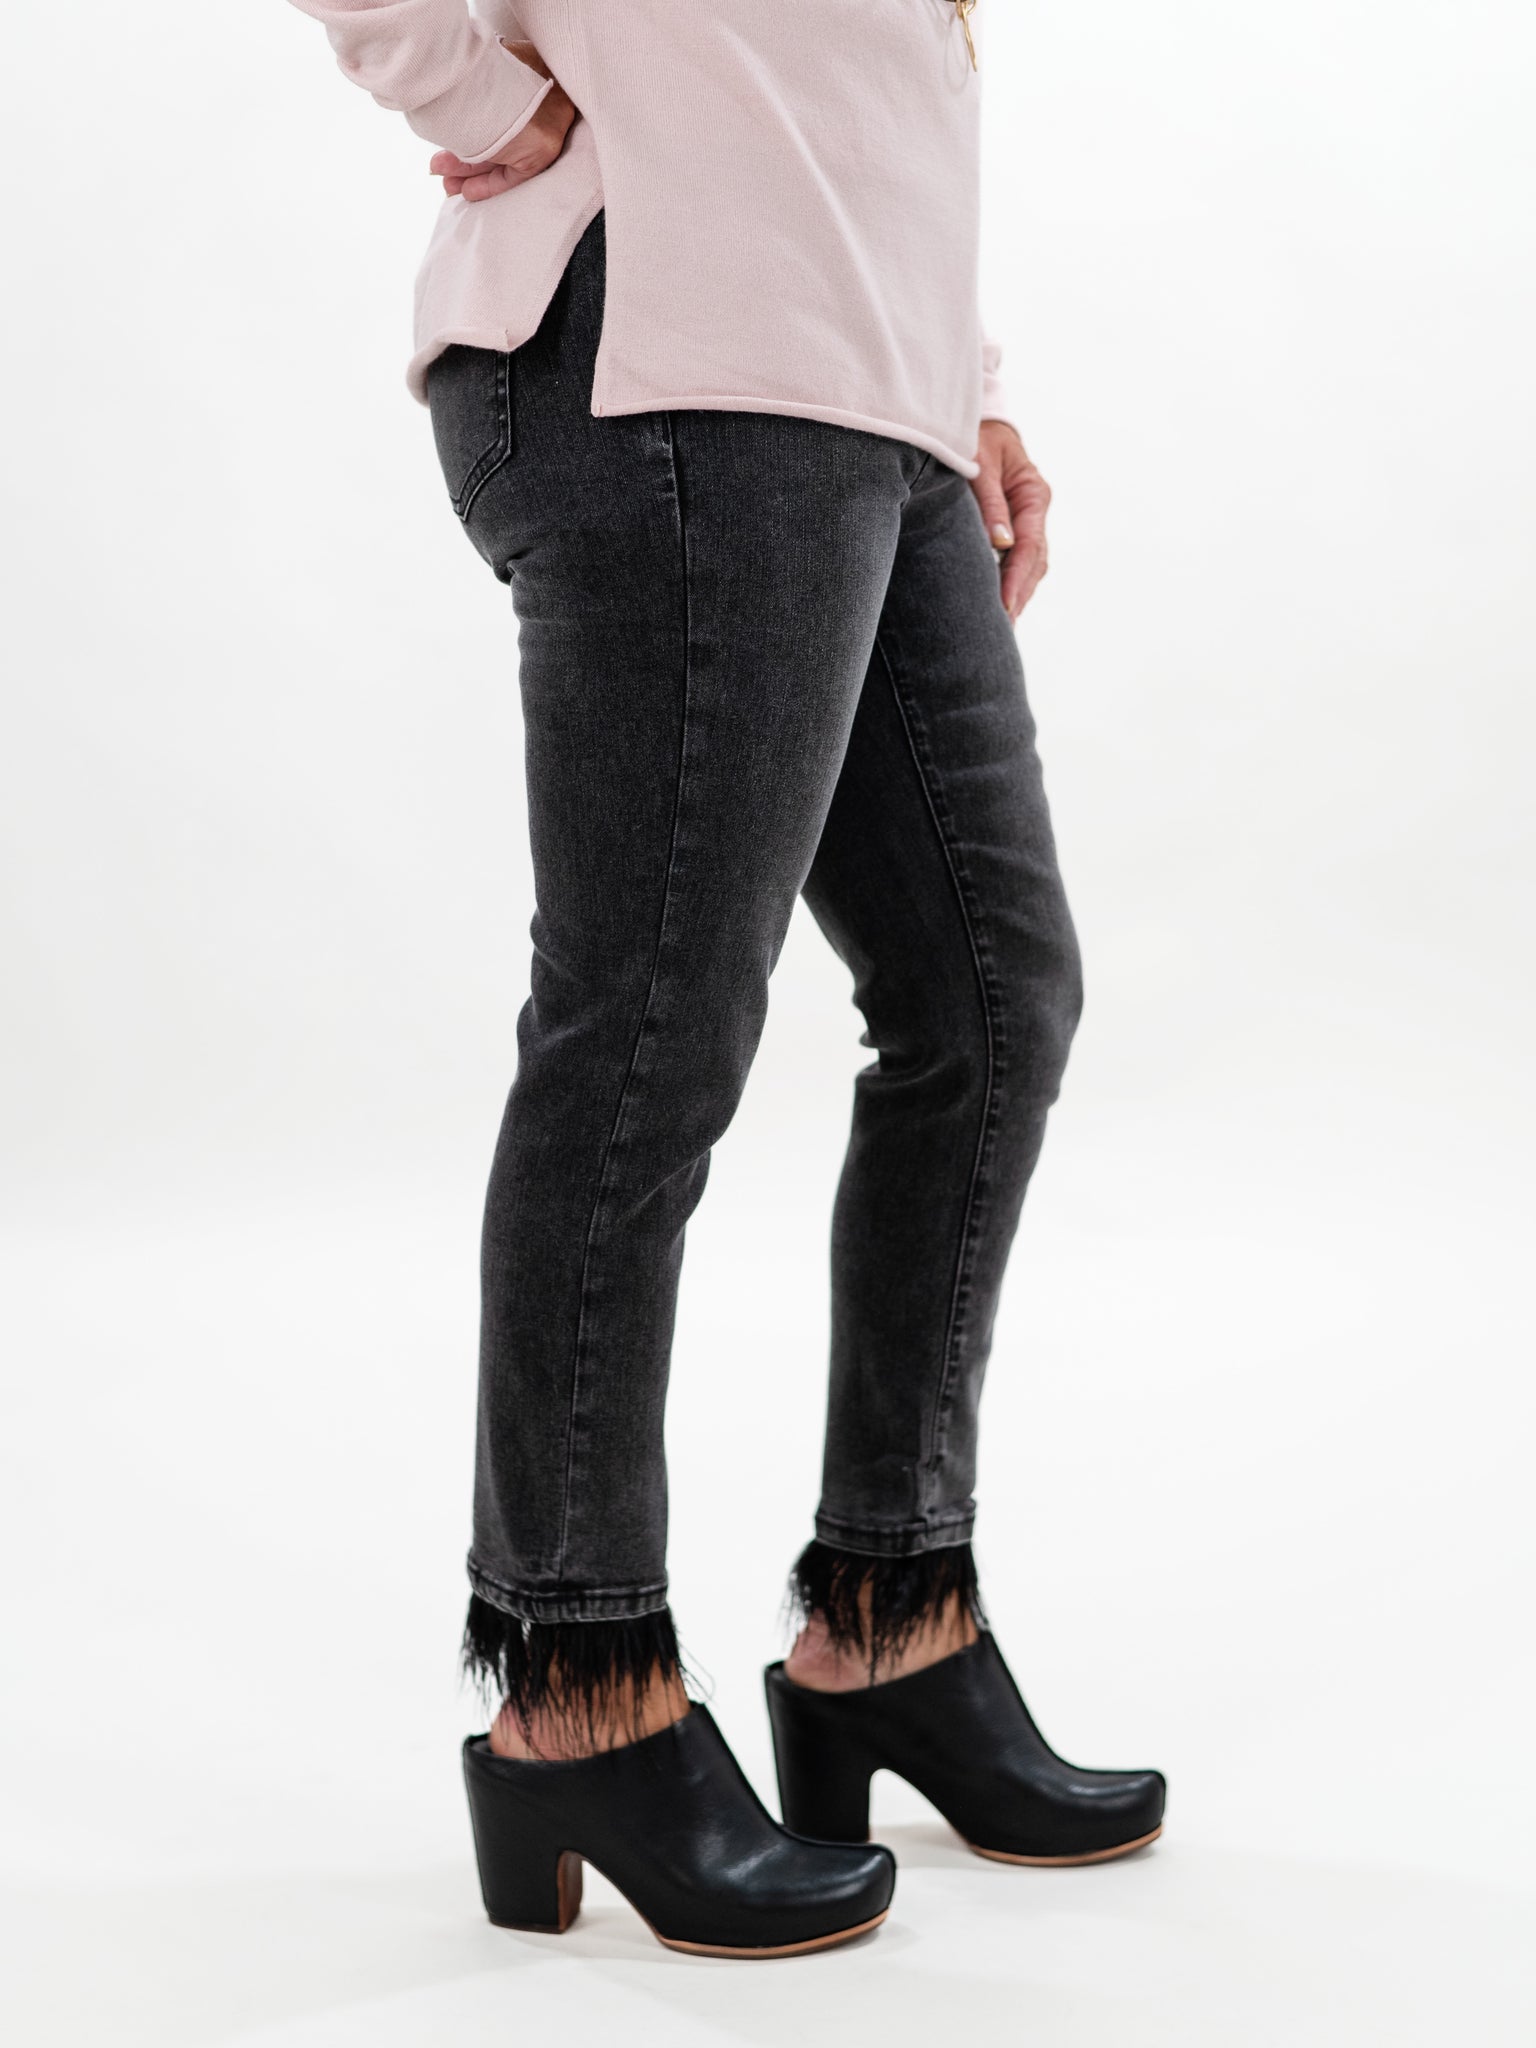 Removable Feather Hem Jean by Charlie B